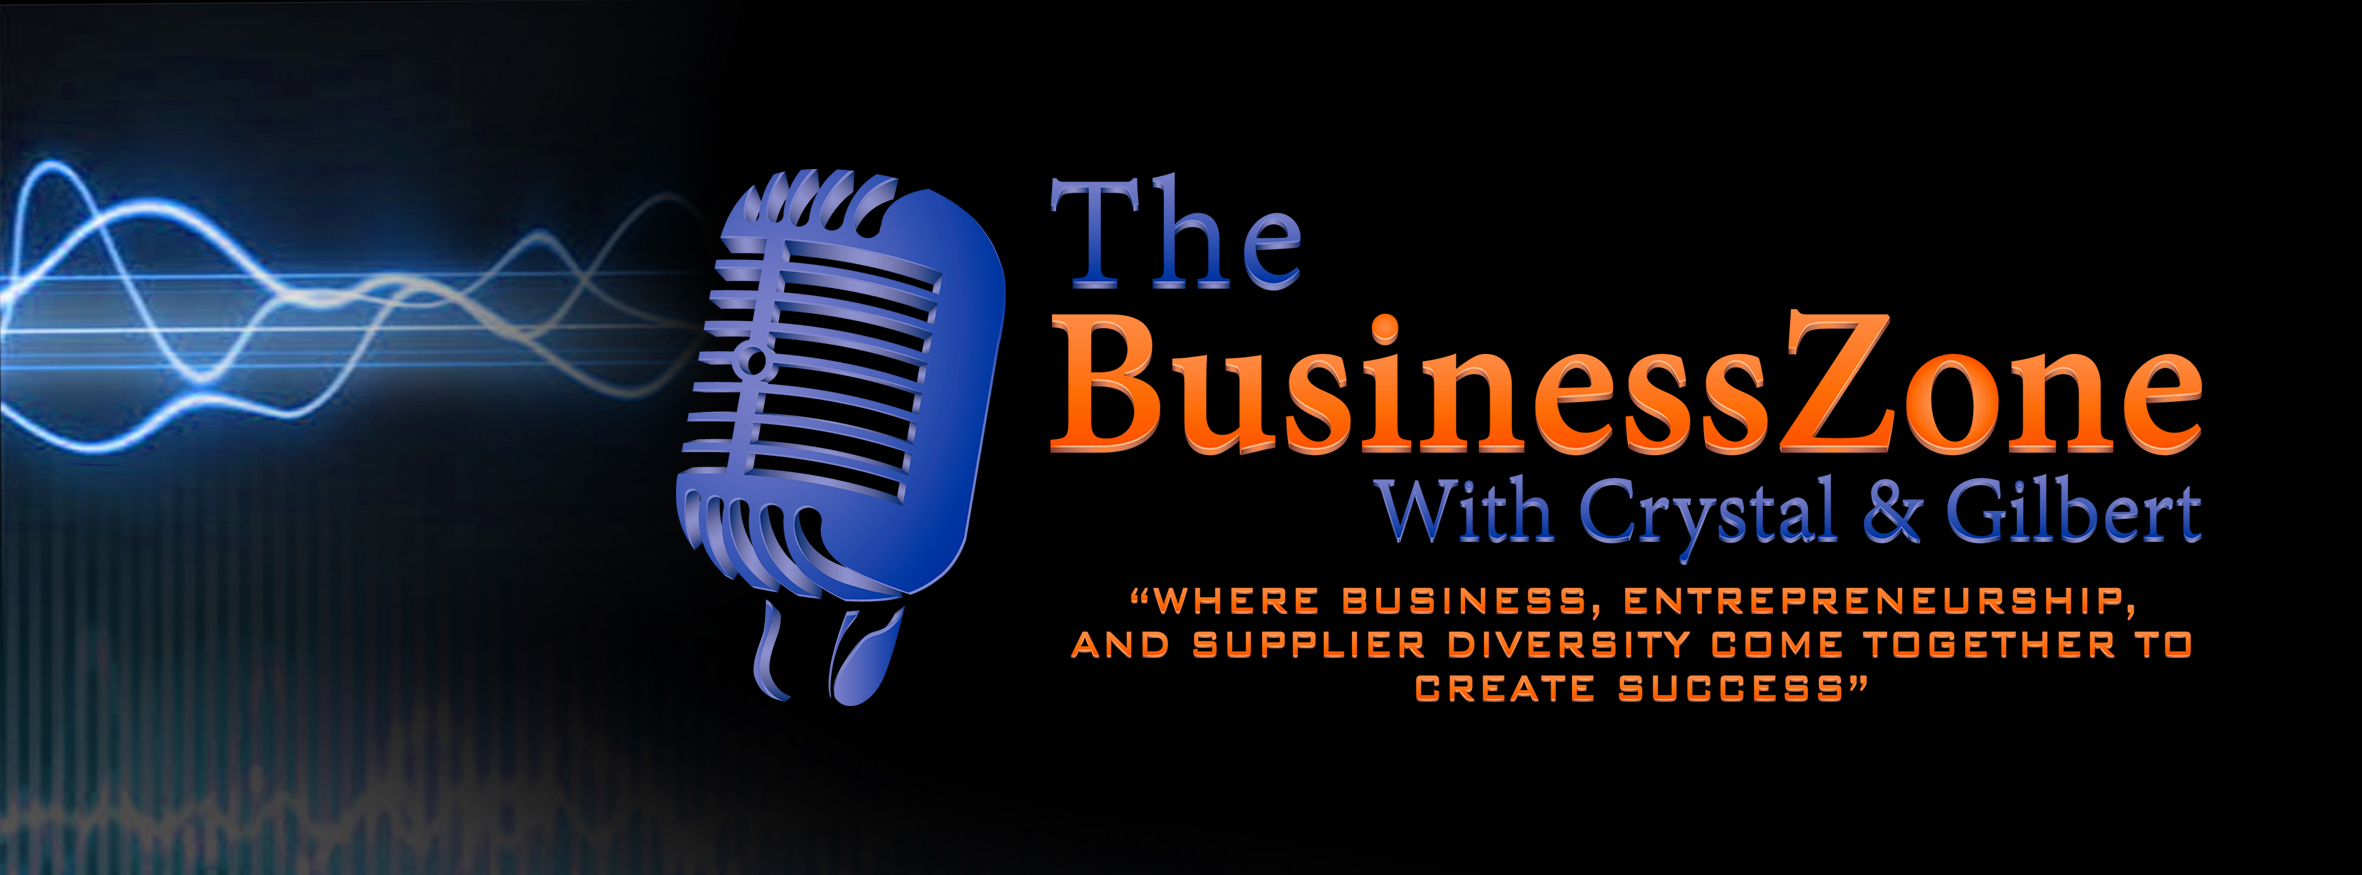 The Business Zone w/Crystal & Gilbert FROM WHOLESALE TO SUPERMARKET 5-05-17 